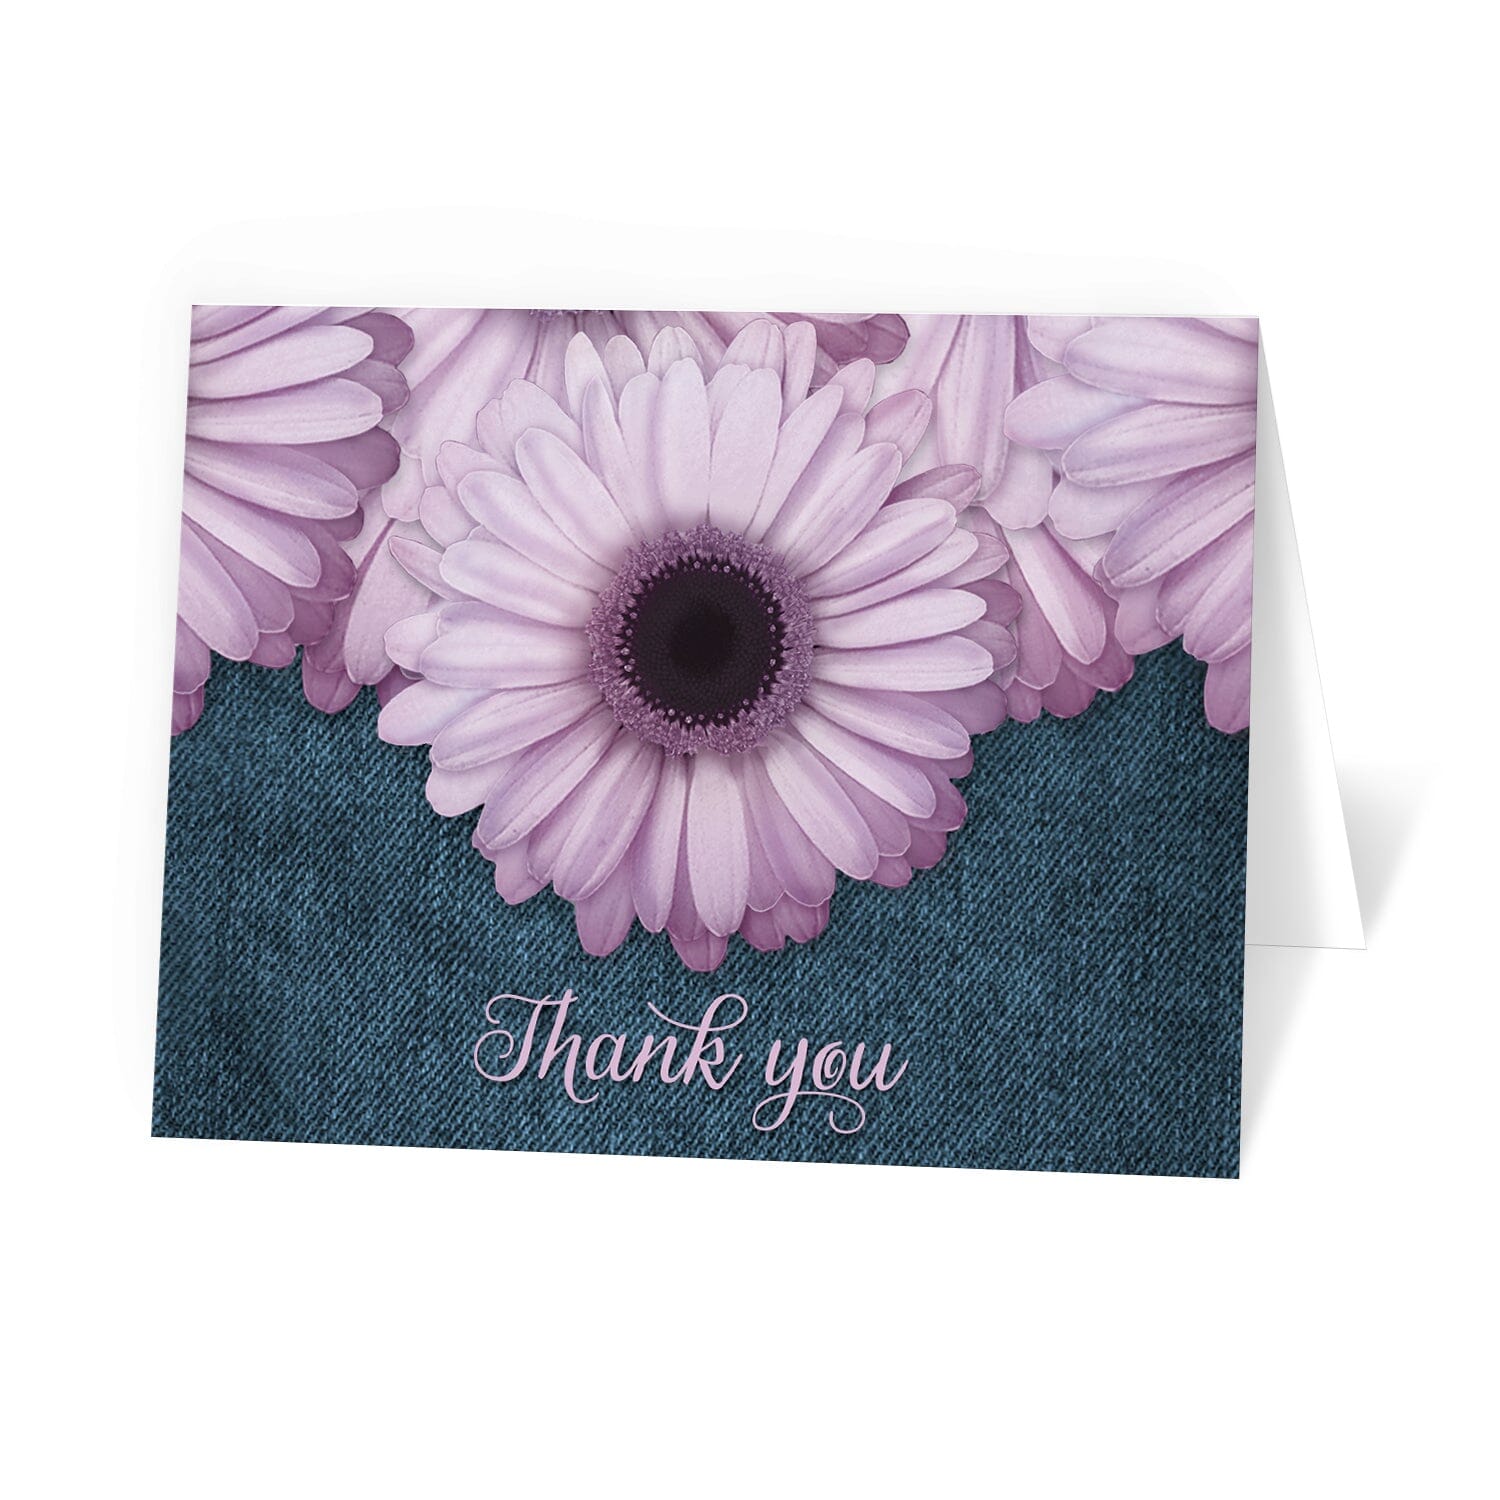 Rustic Purple Daisy Denim Thank You Cards at Artistically Invited.